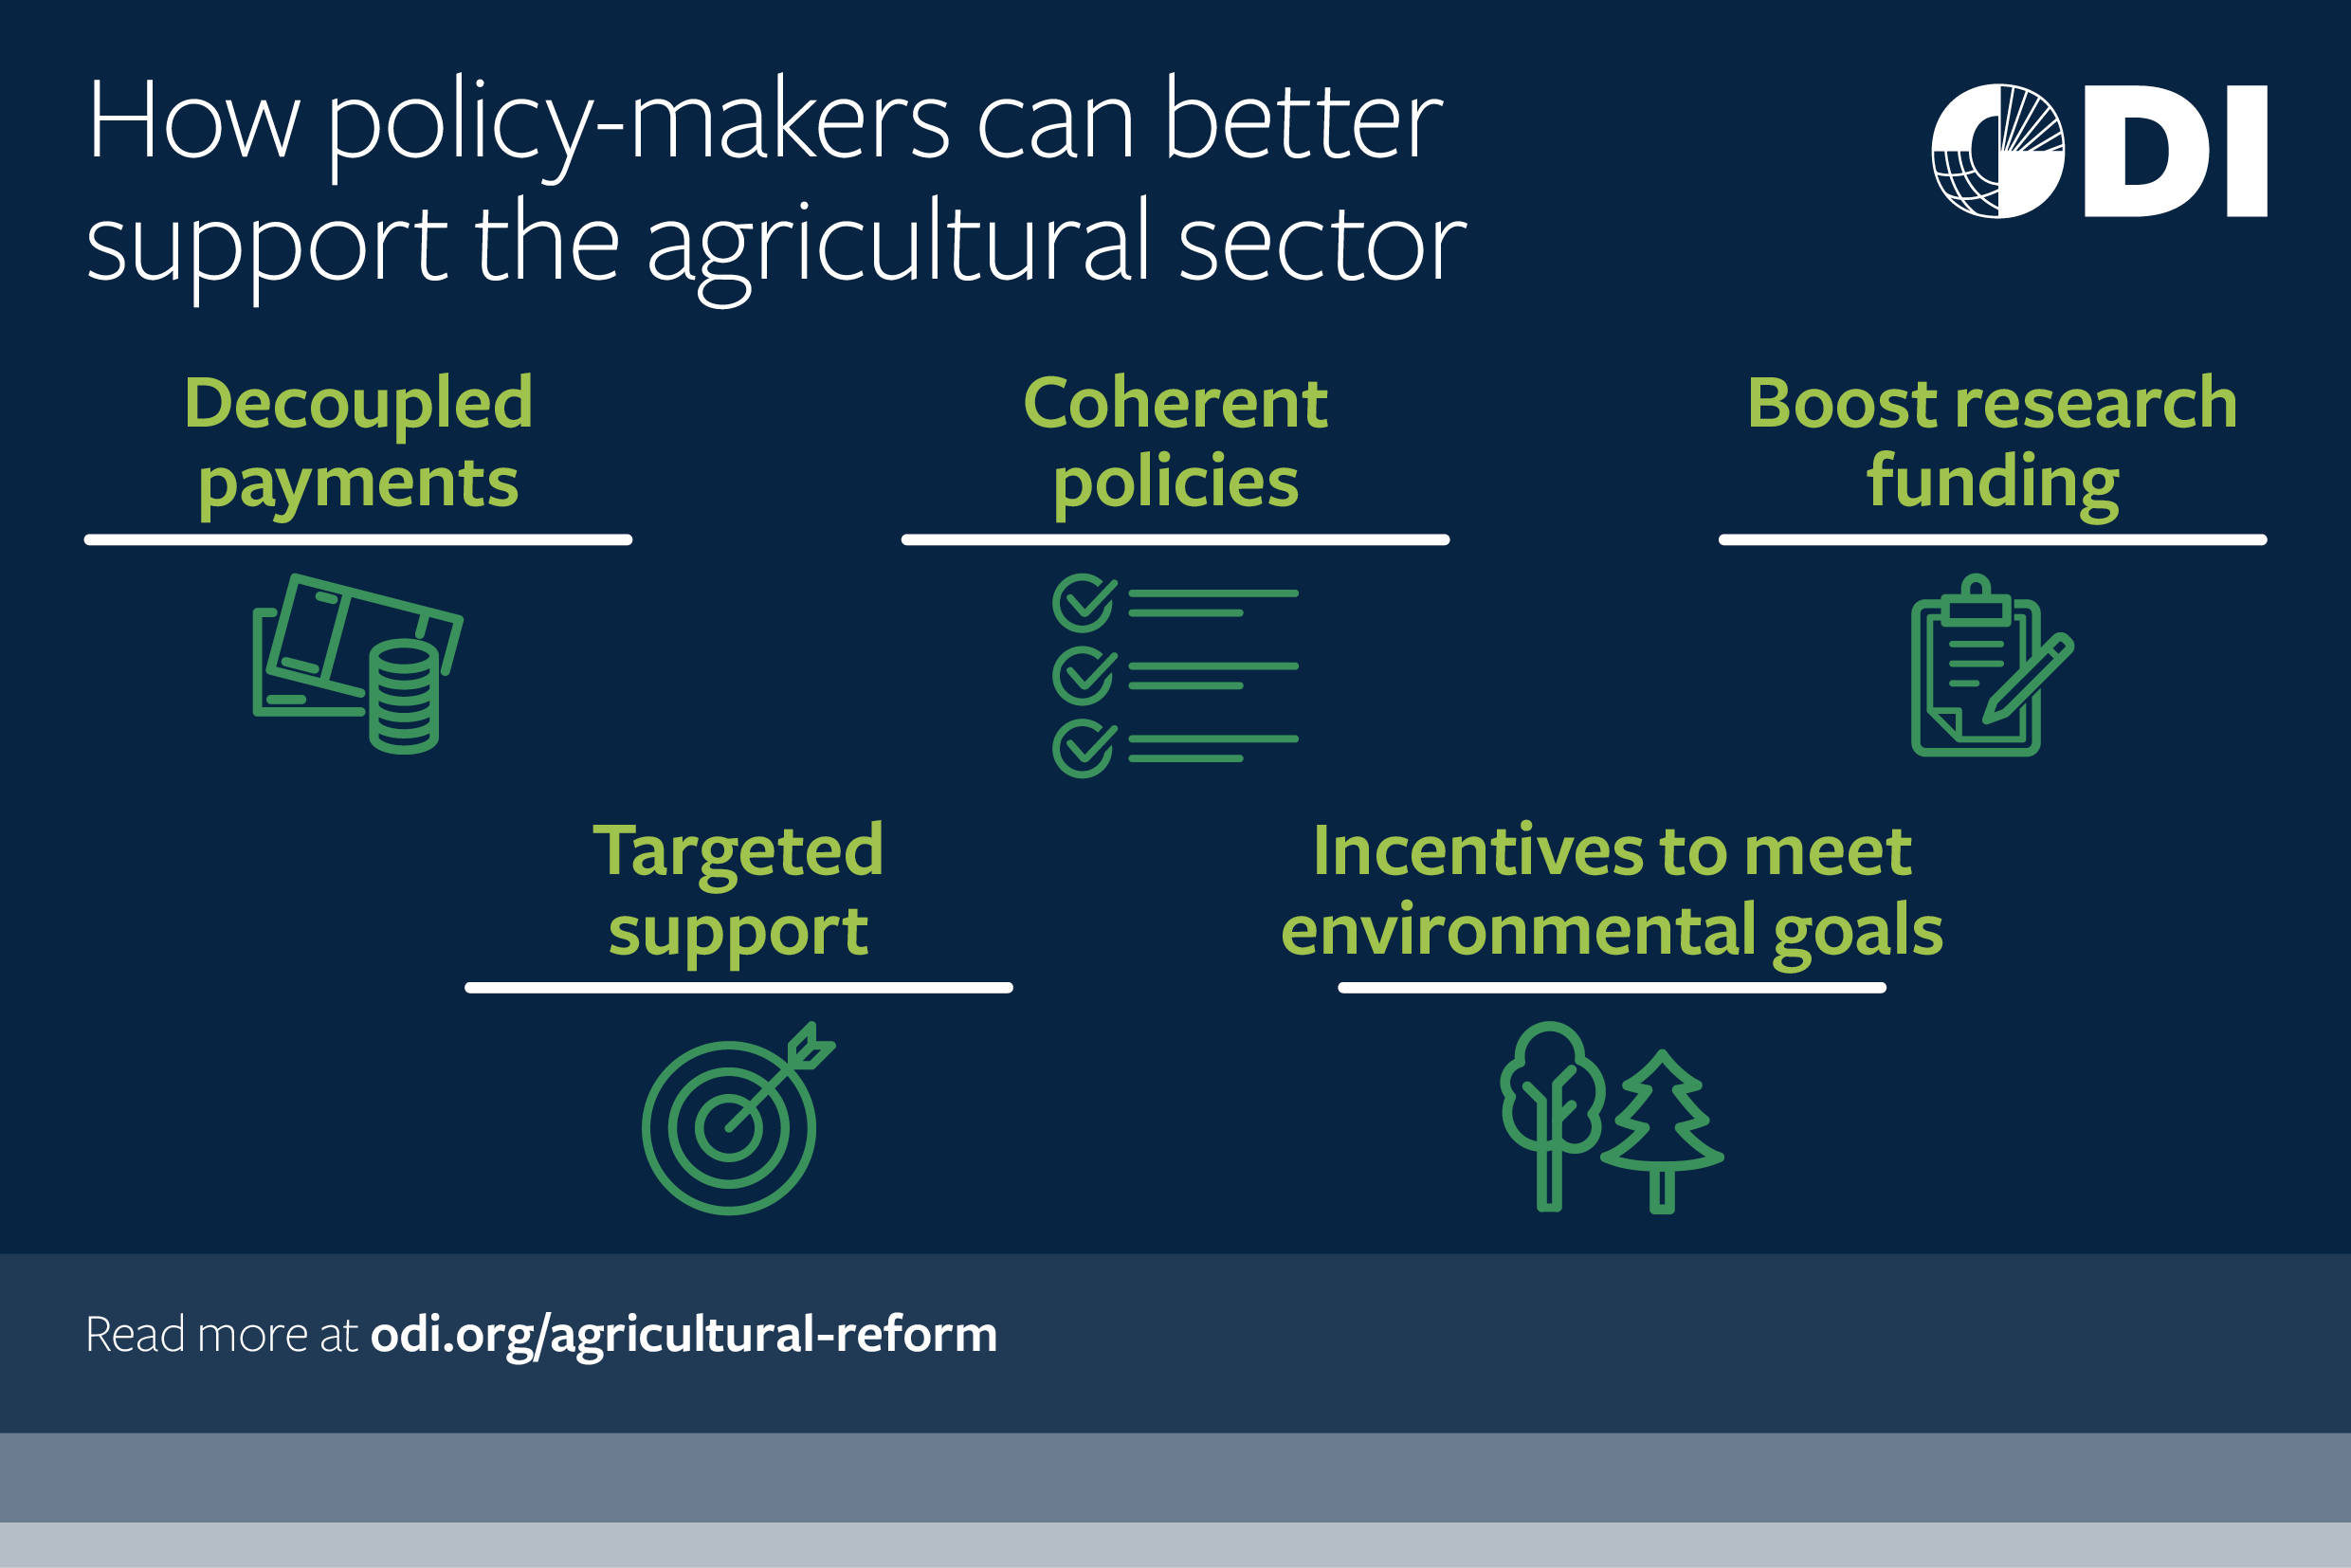 How policy-makers can better support the agricultural sector.